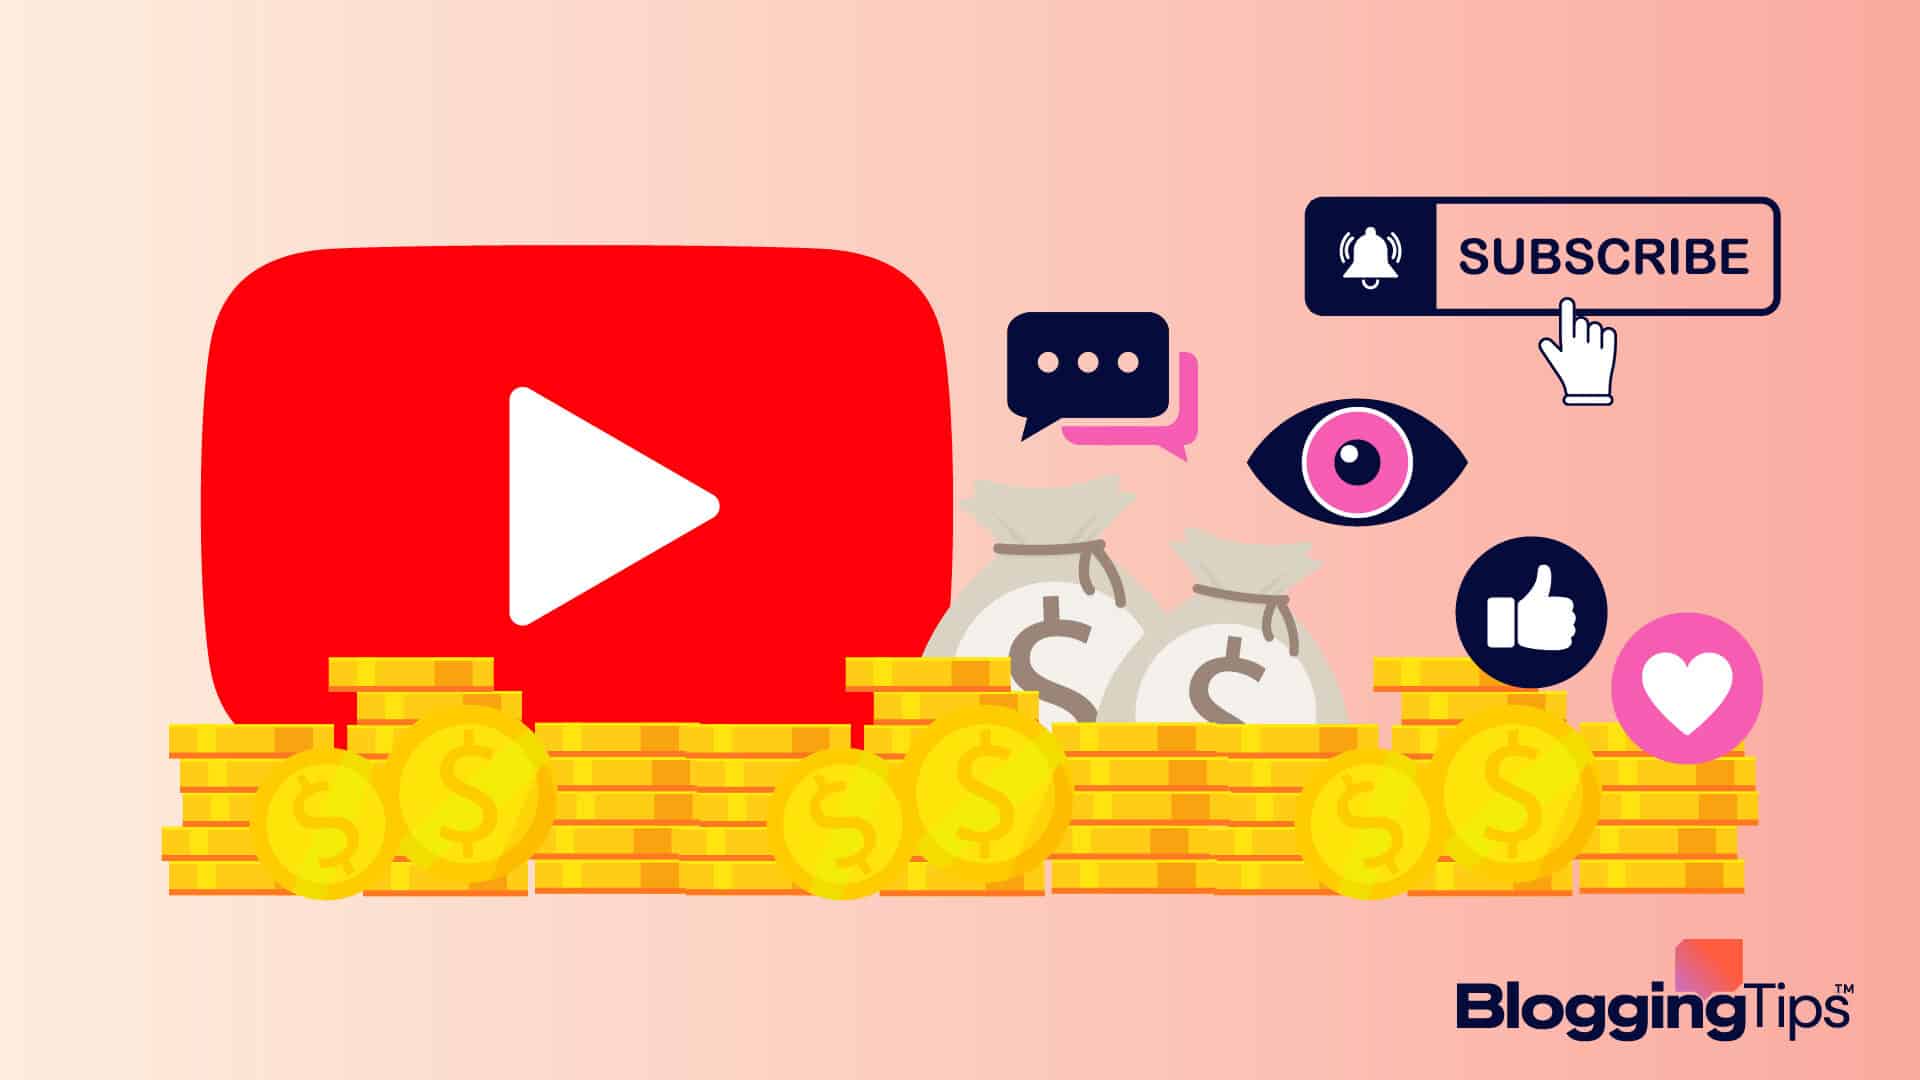 vector graphic showing an illustration of money being made from Youtube